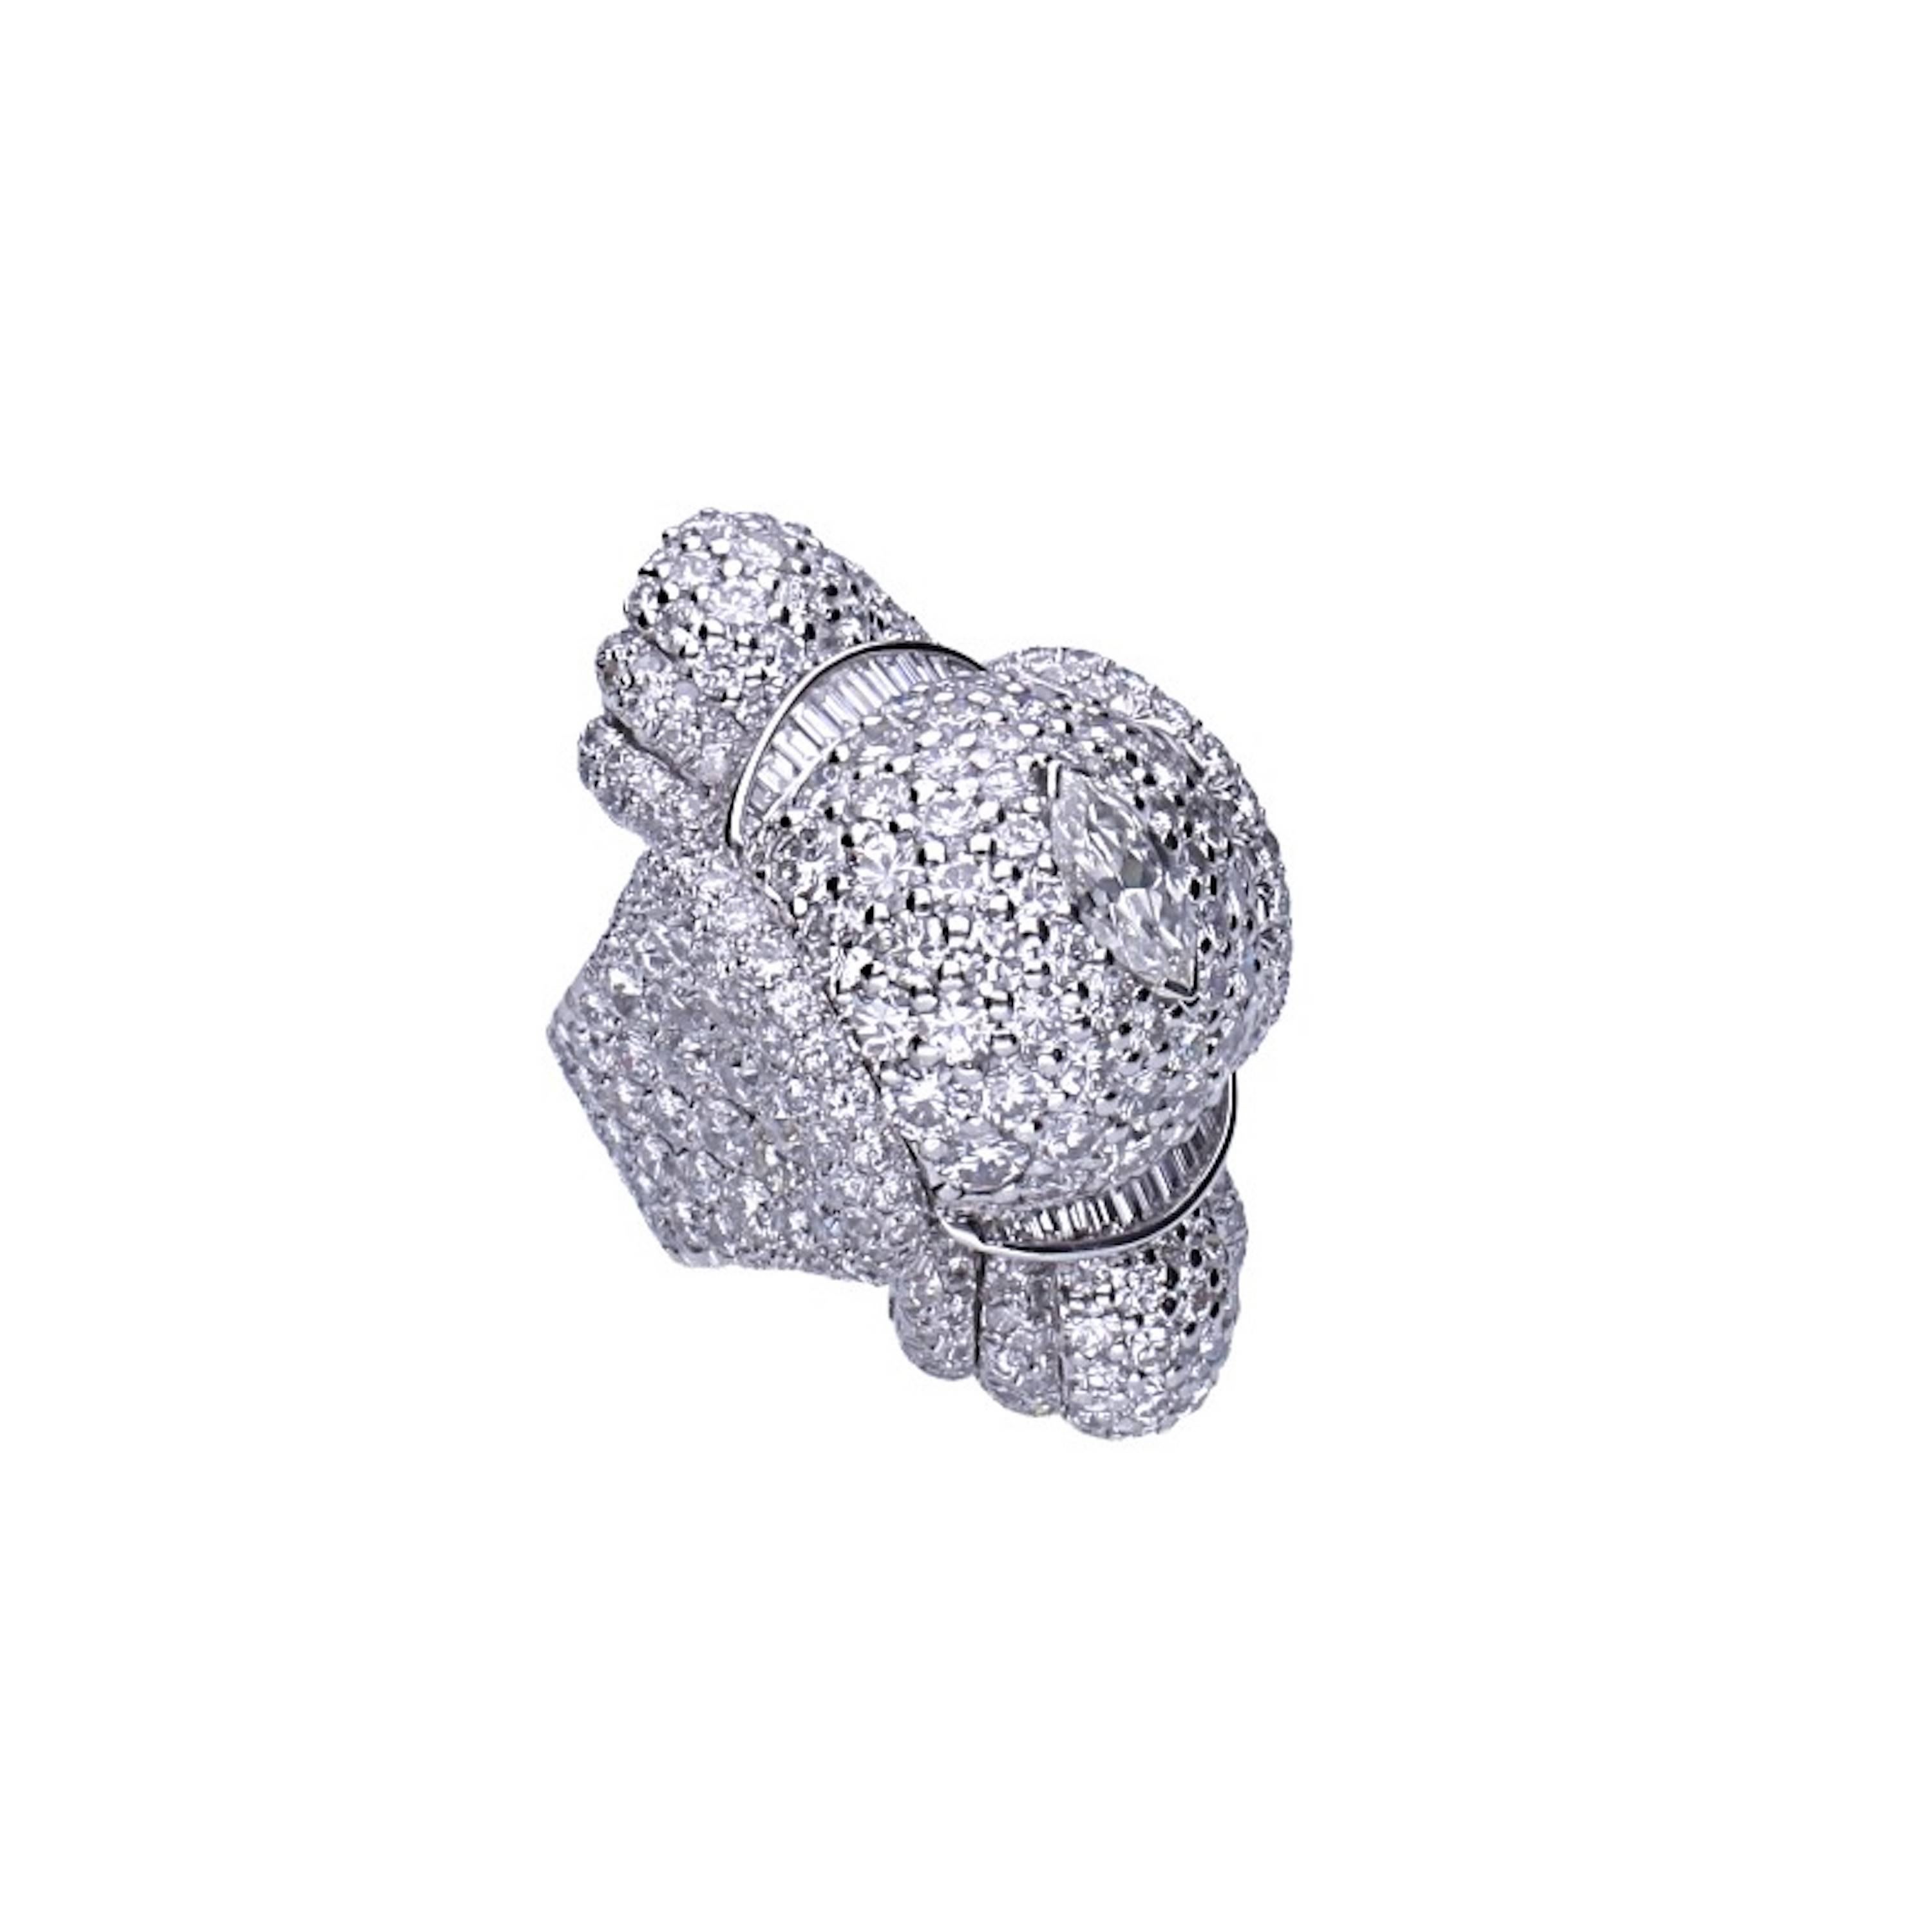 Platinum and 18 kt. white gold ring with navette, baguettes and round-cut diamonds.
Navette diamond: 1.45 carat
Baguette diamond: 1.30 carat 
Round-cut diamonds: 32.00 carats 
Exceptional platinum ring ca 1940, completely hand-made.
Weight: gr.